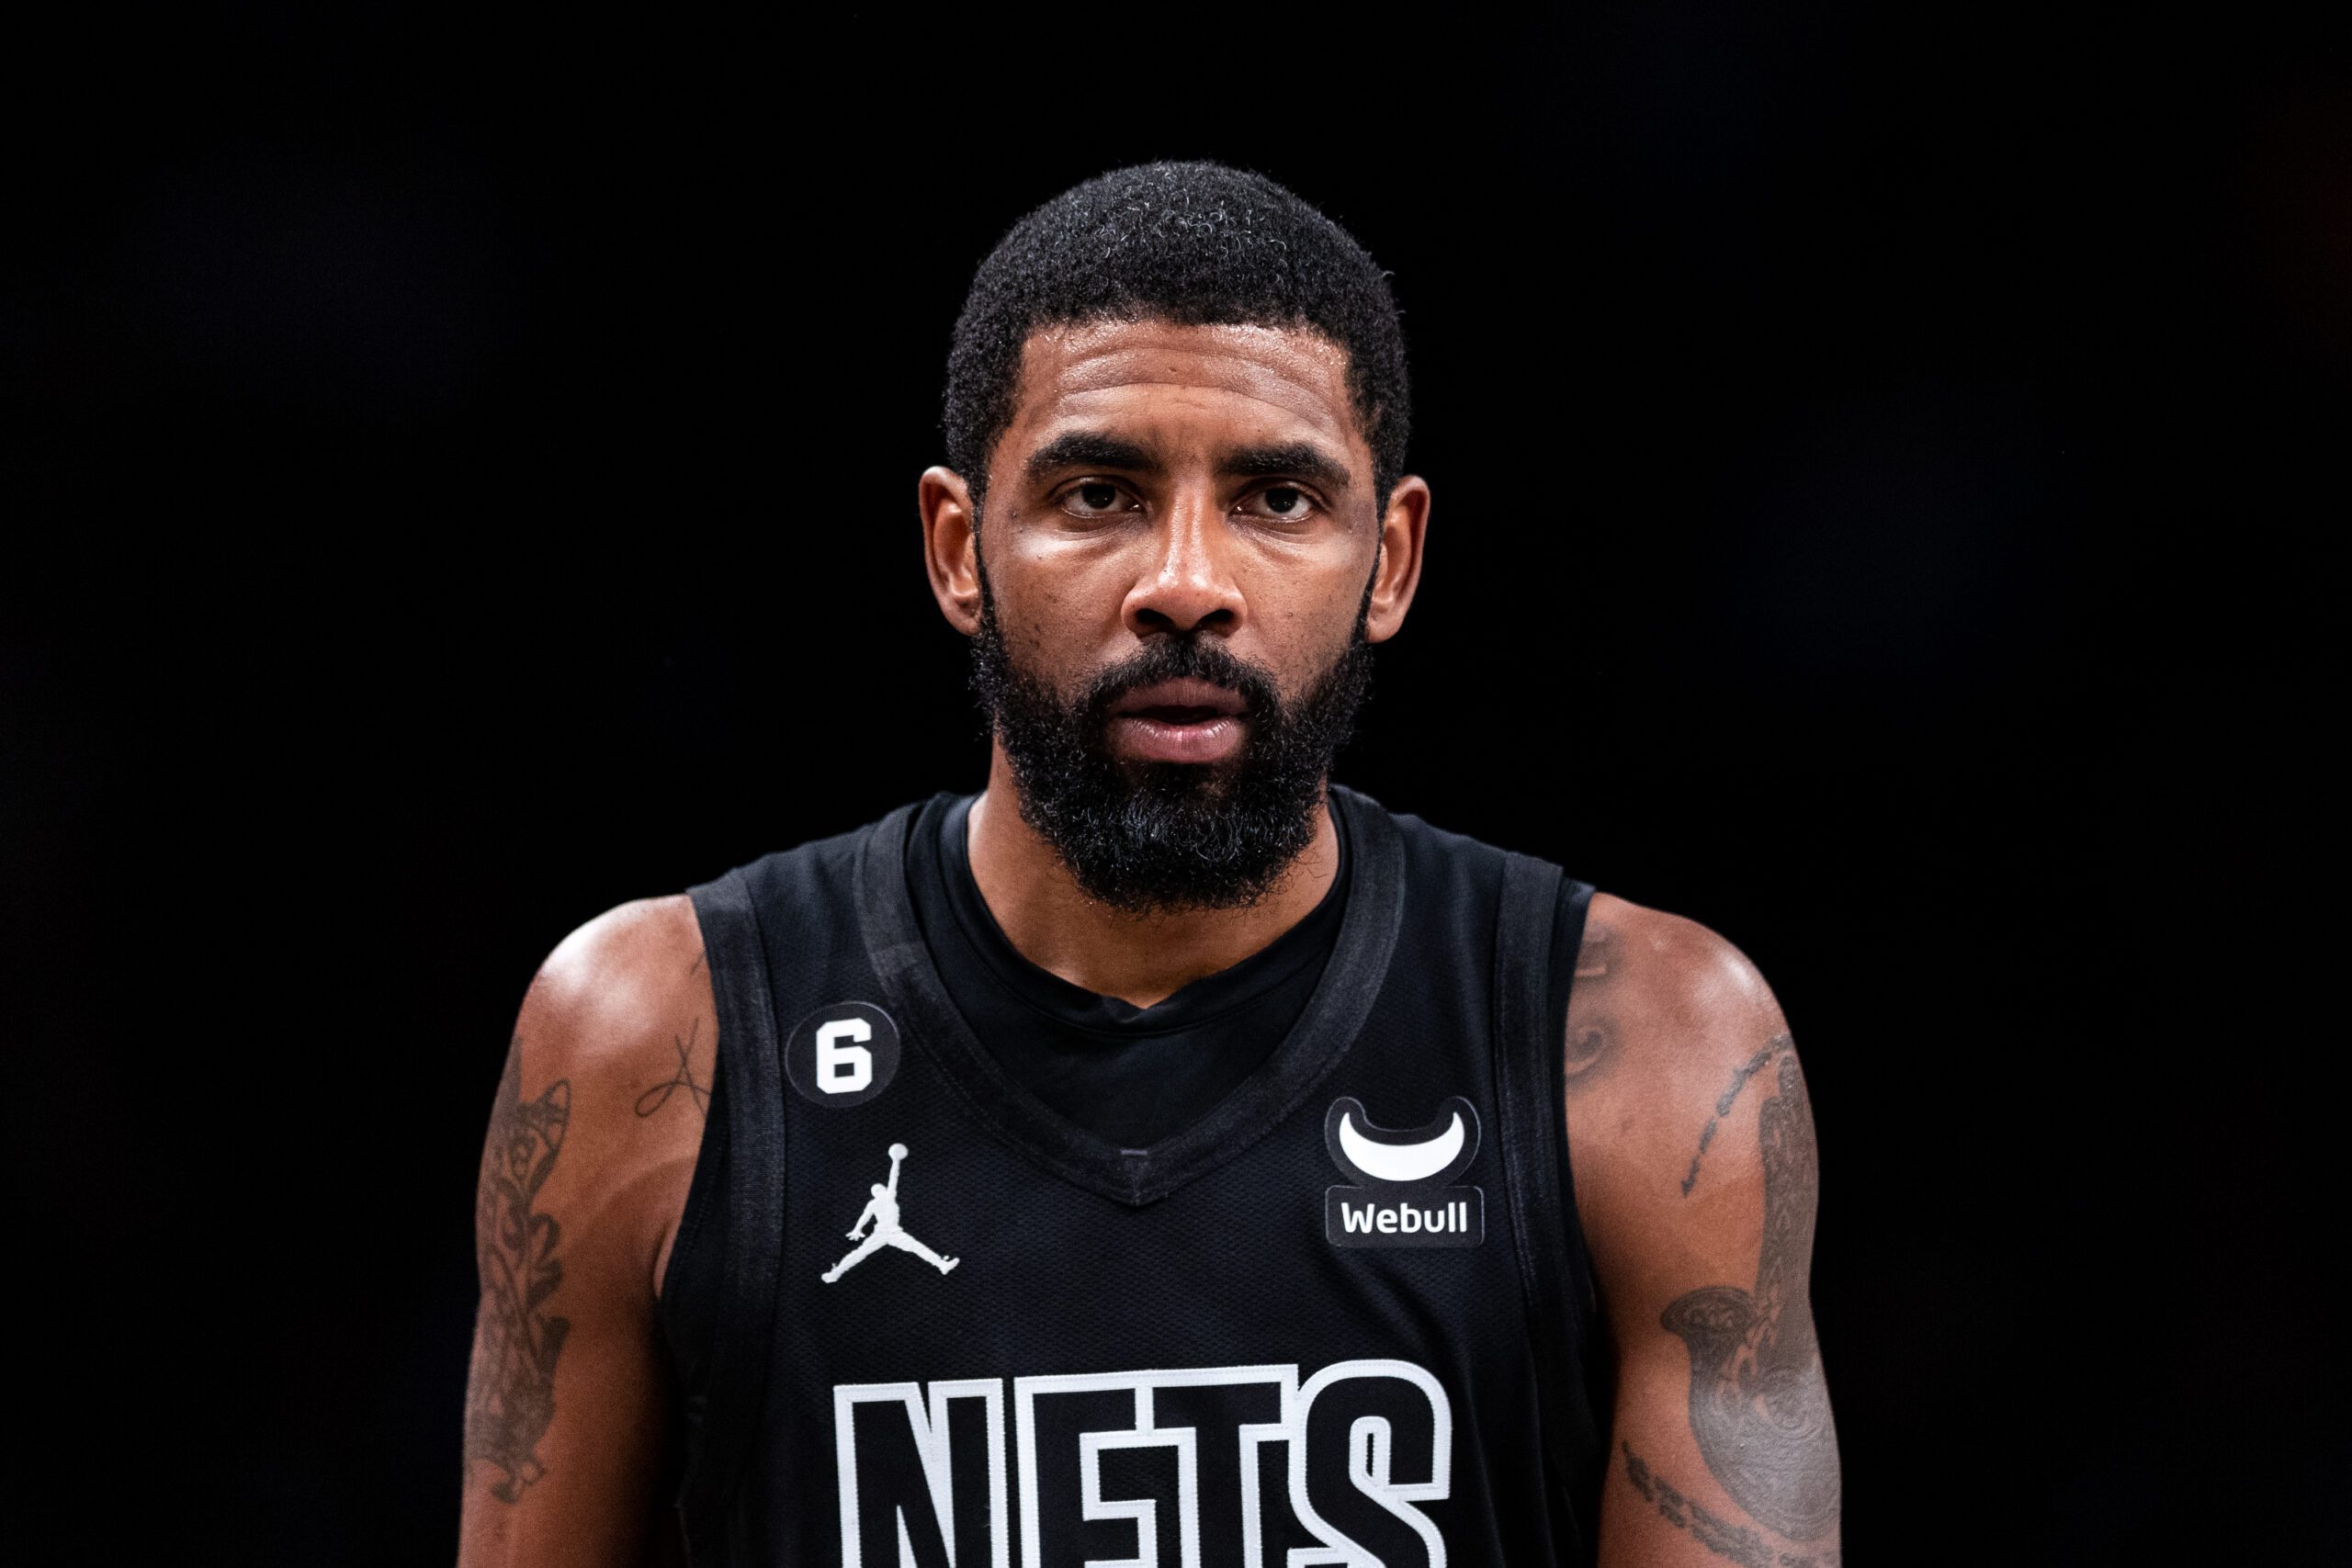 brooklyn-nets-suspend-kyrie-irving-after-he-refuses-to-apologize-for-tweeting-‘anti-semitic’-movie